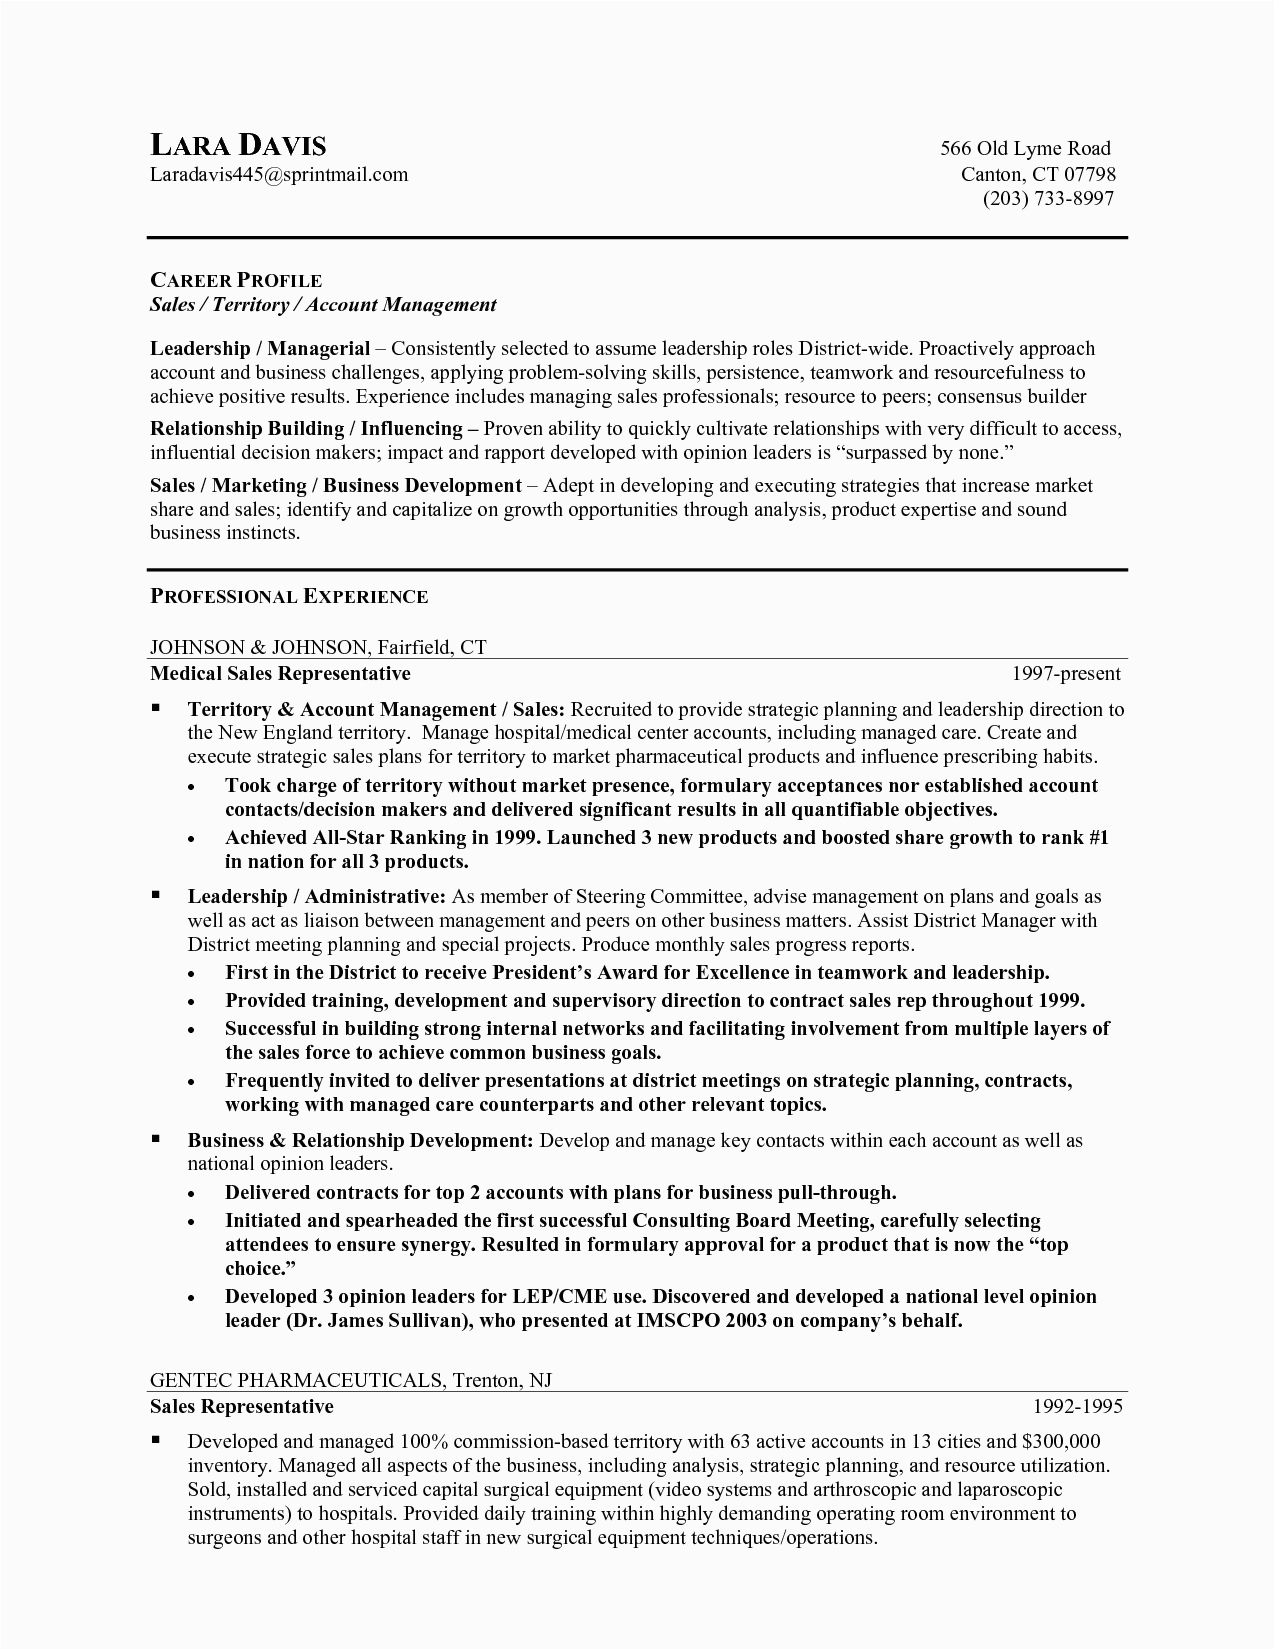 Sample Resume Objective Statements for Customer Service Customer Service Sales Resume Objective Examples Free